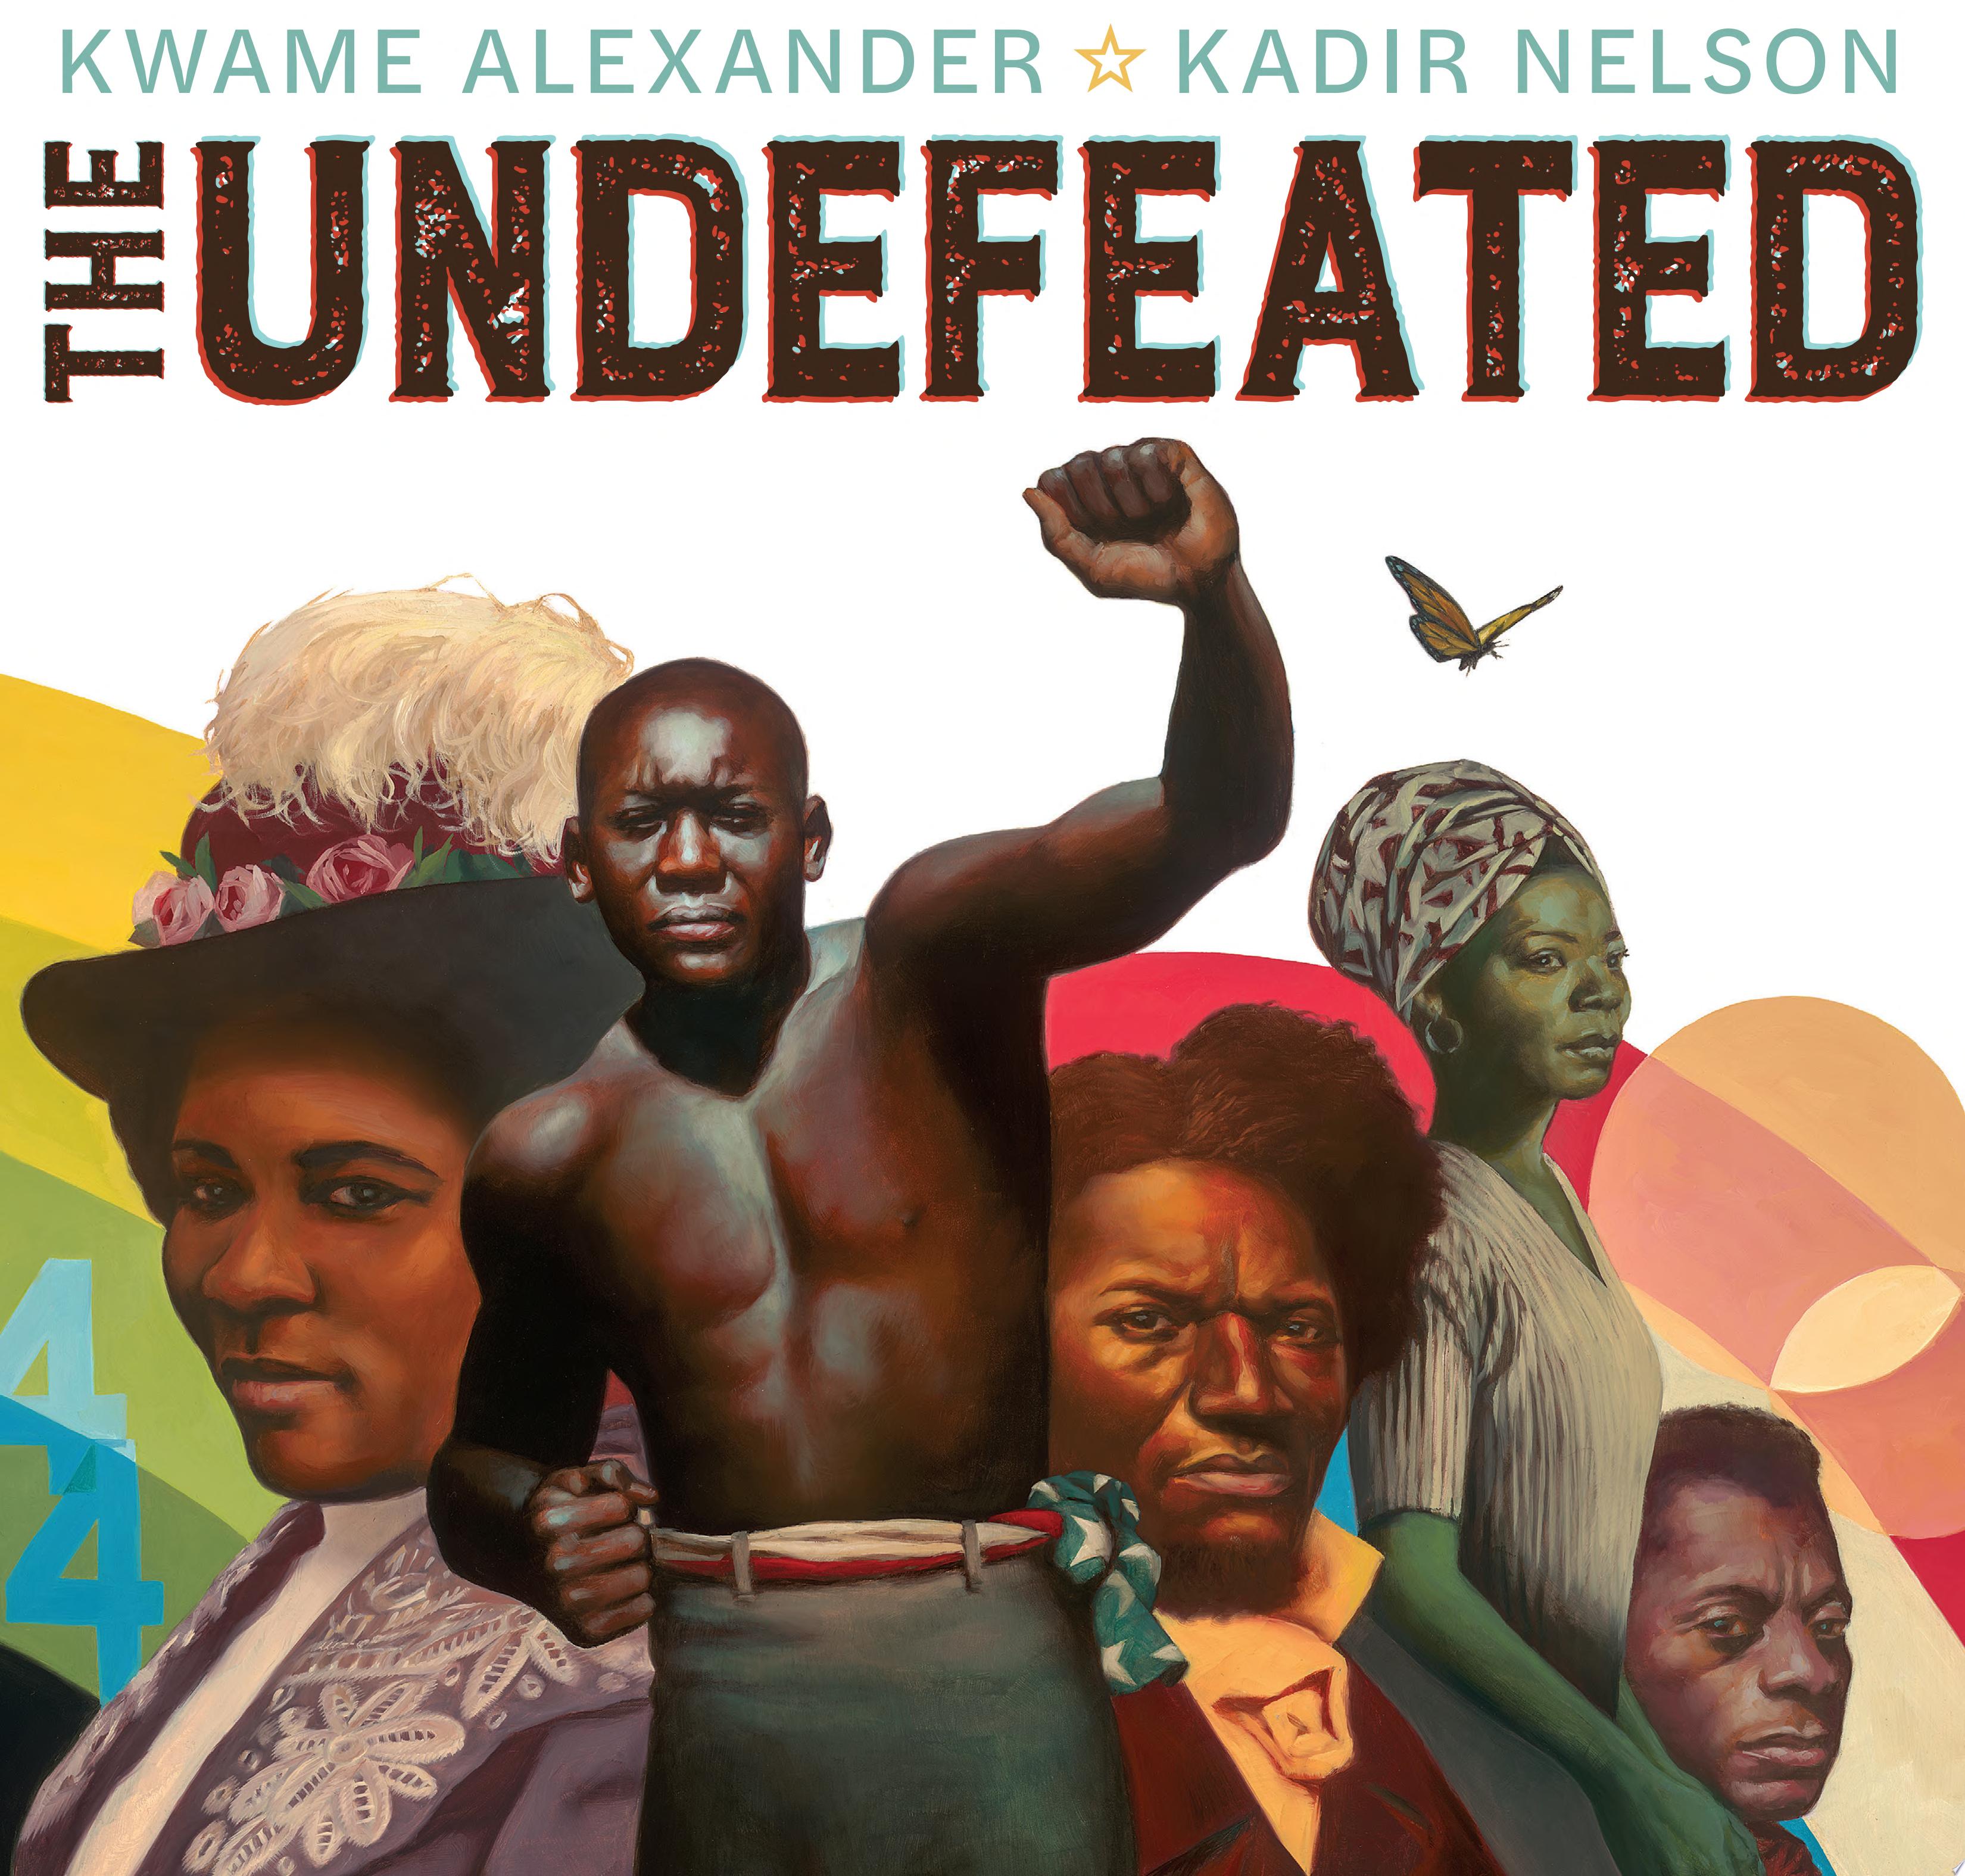 Image for "The Undefeated" - an illustration of important people from throughout African American history.